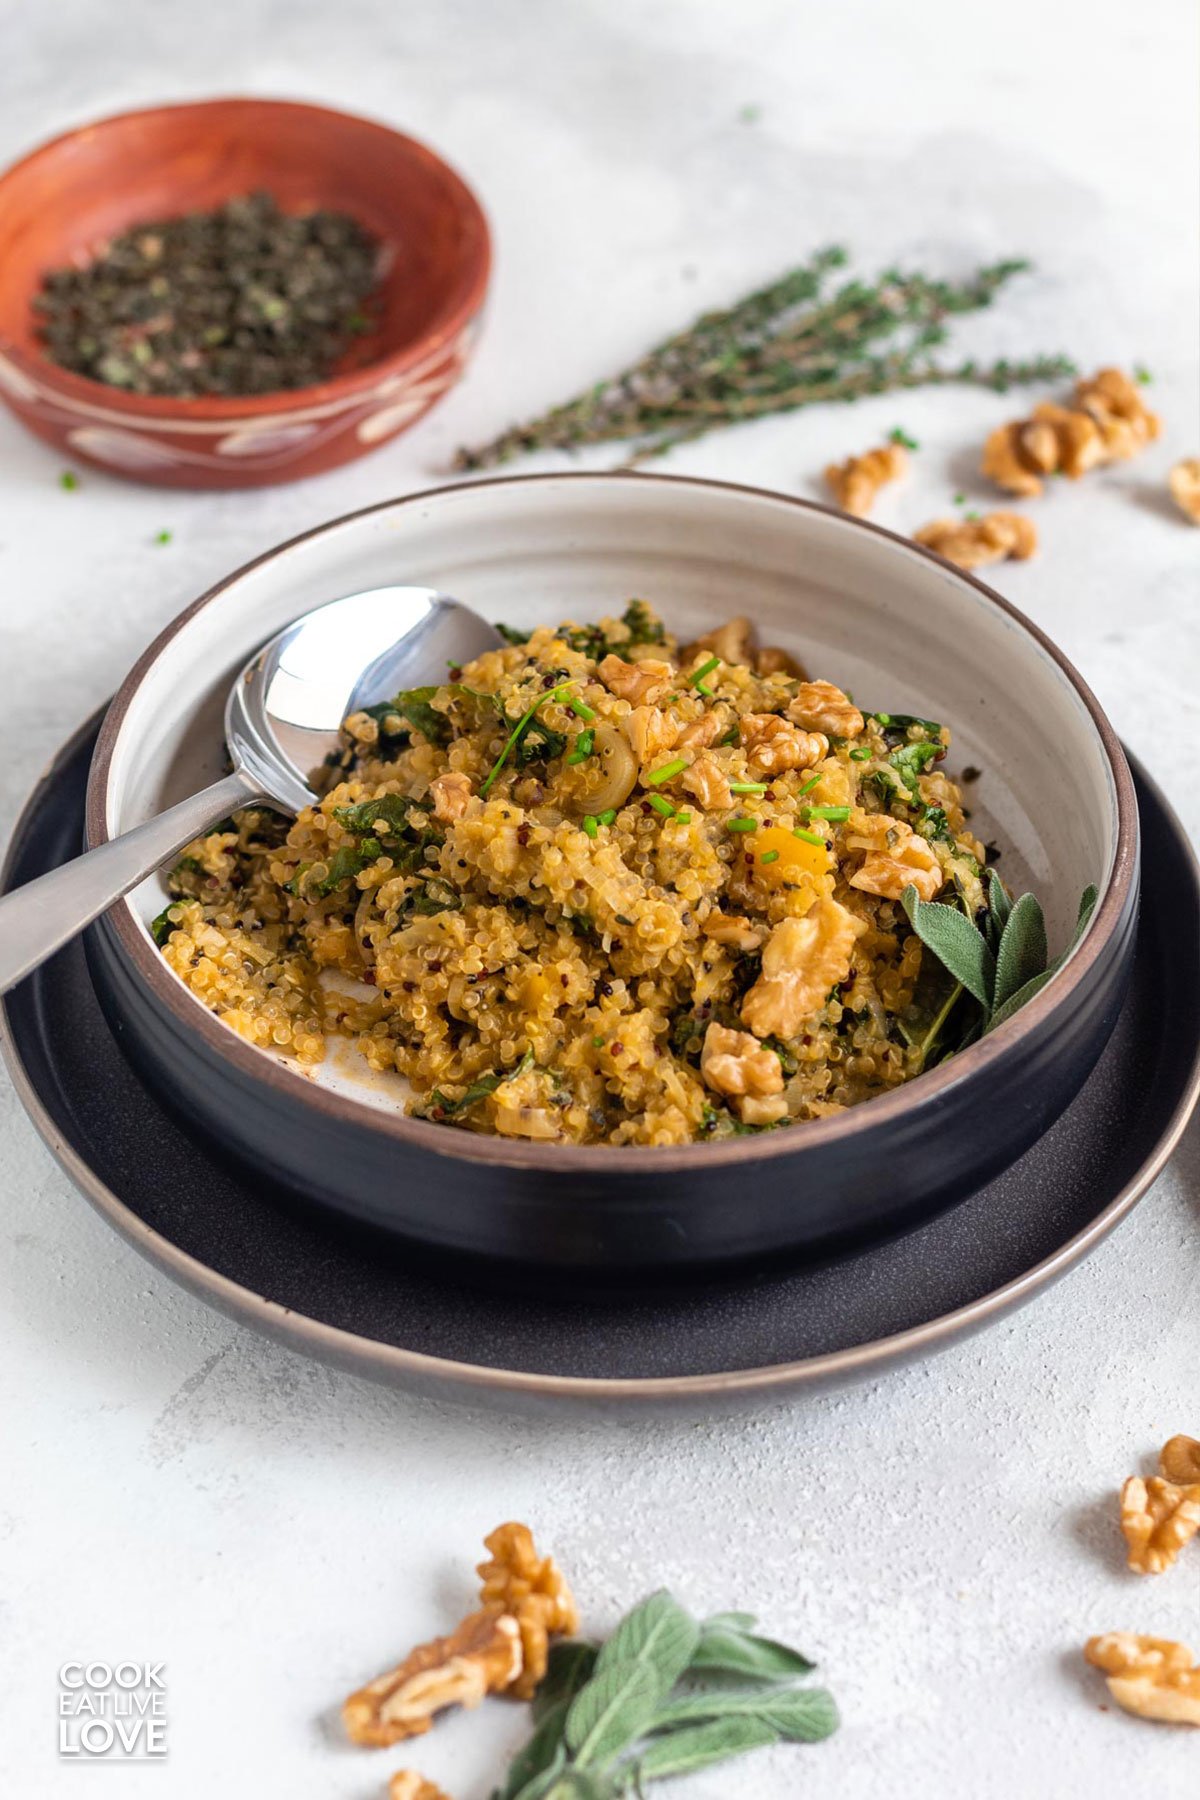 Bowl of quinoa risotto on a plate with a spoon in the dish.